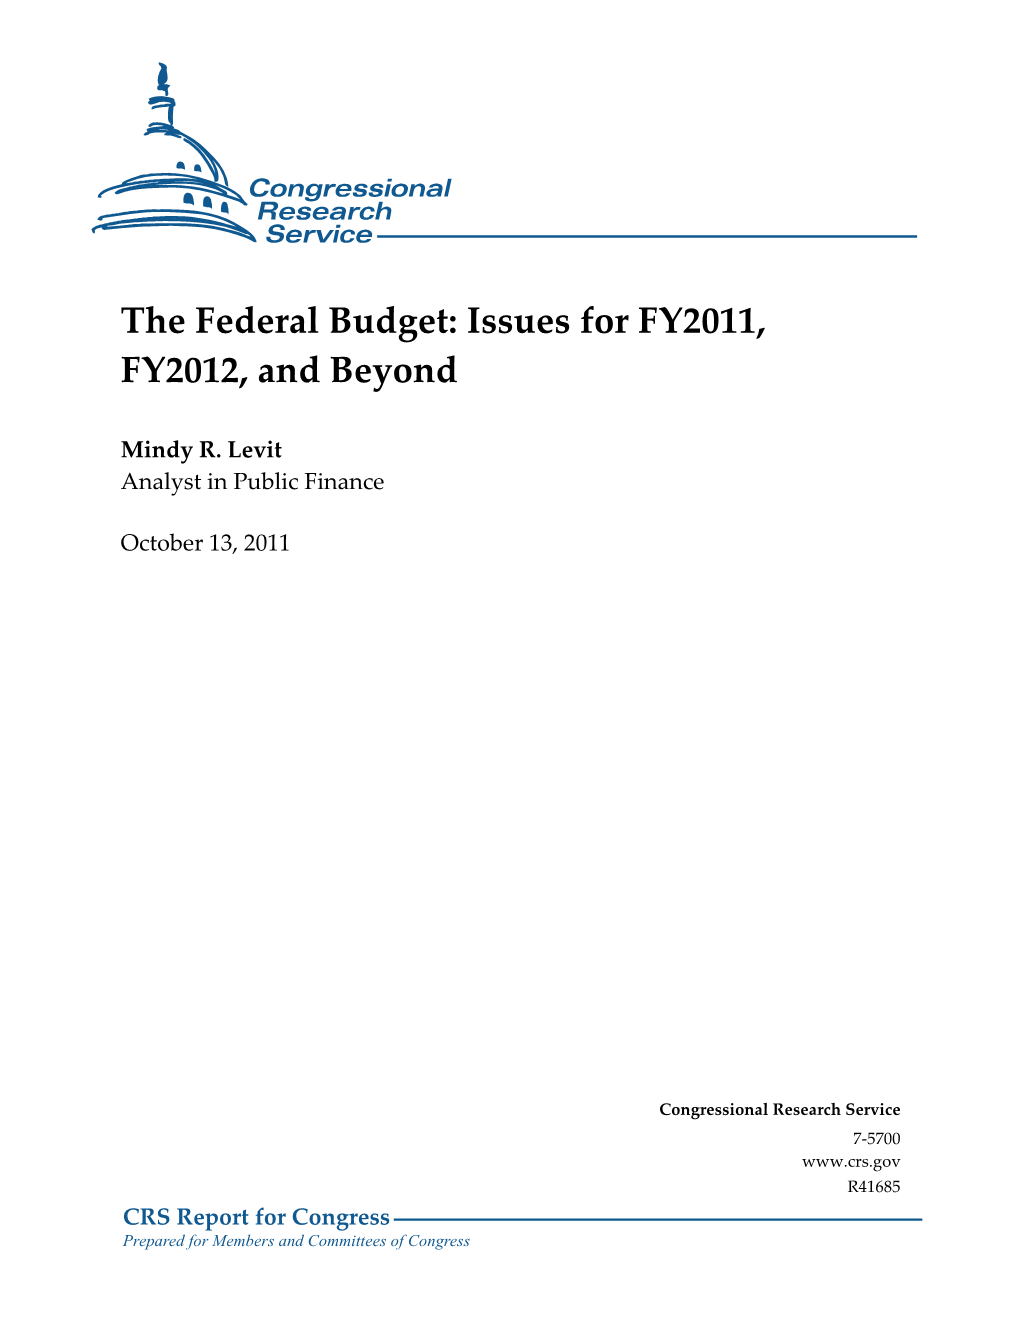 The Federal Budget: Issues for FY2011, FY2012, and Beyond